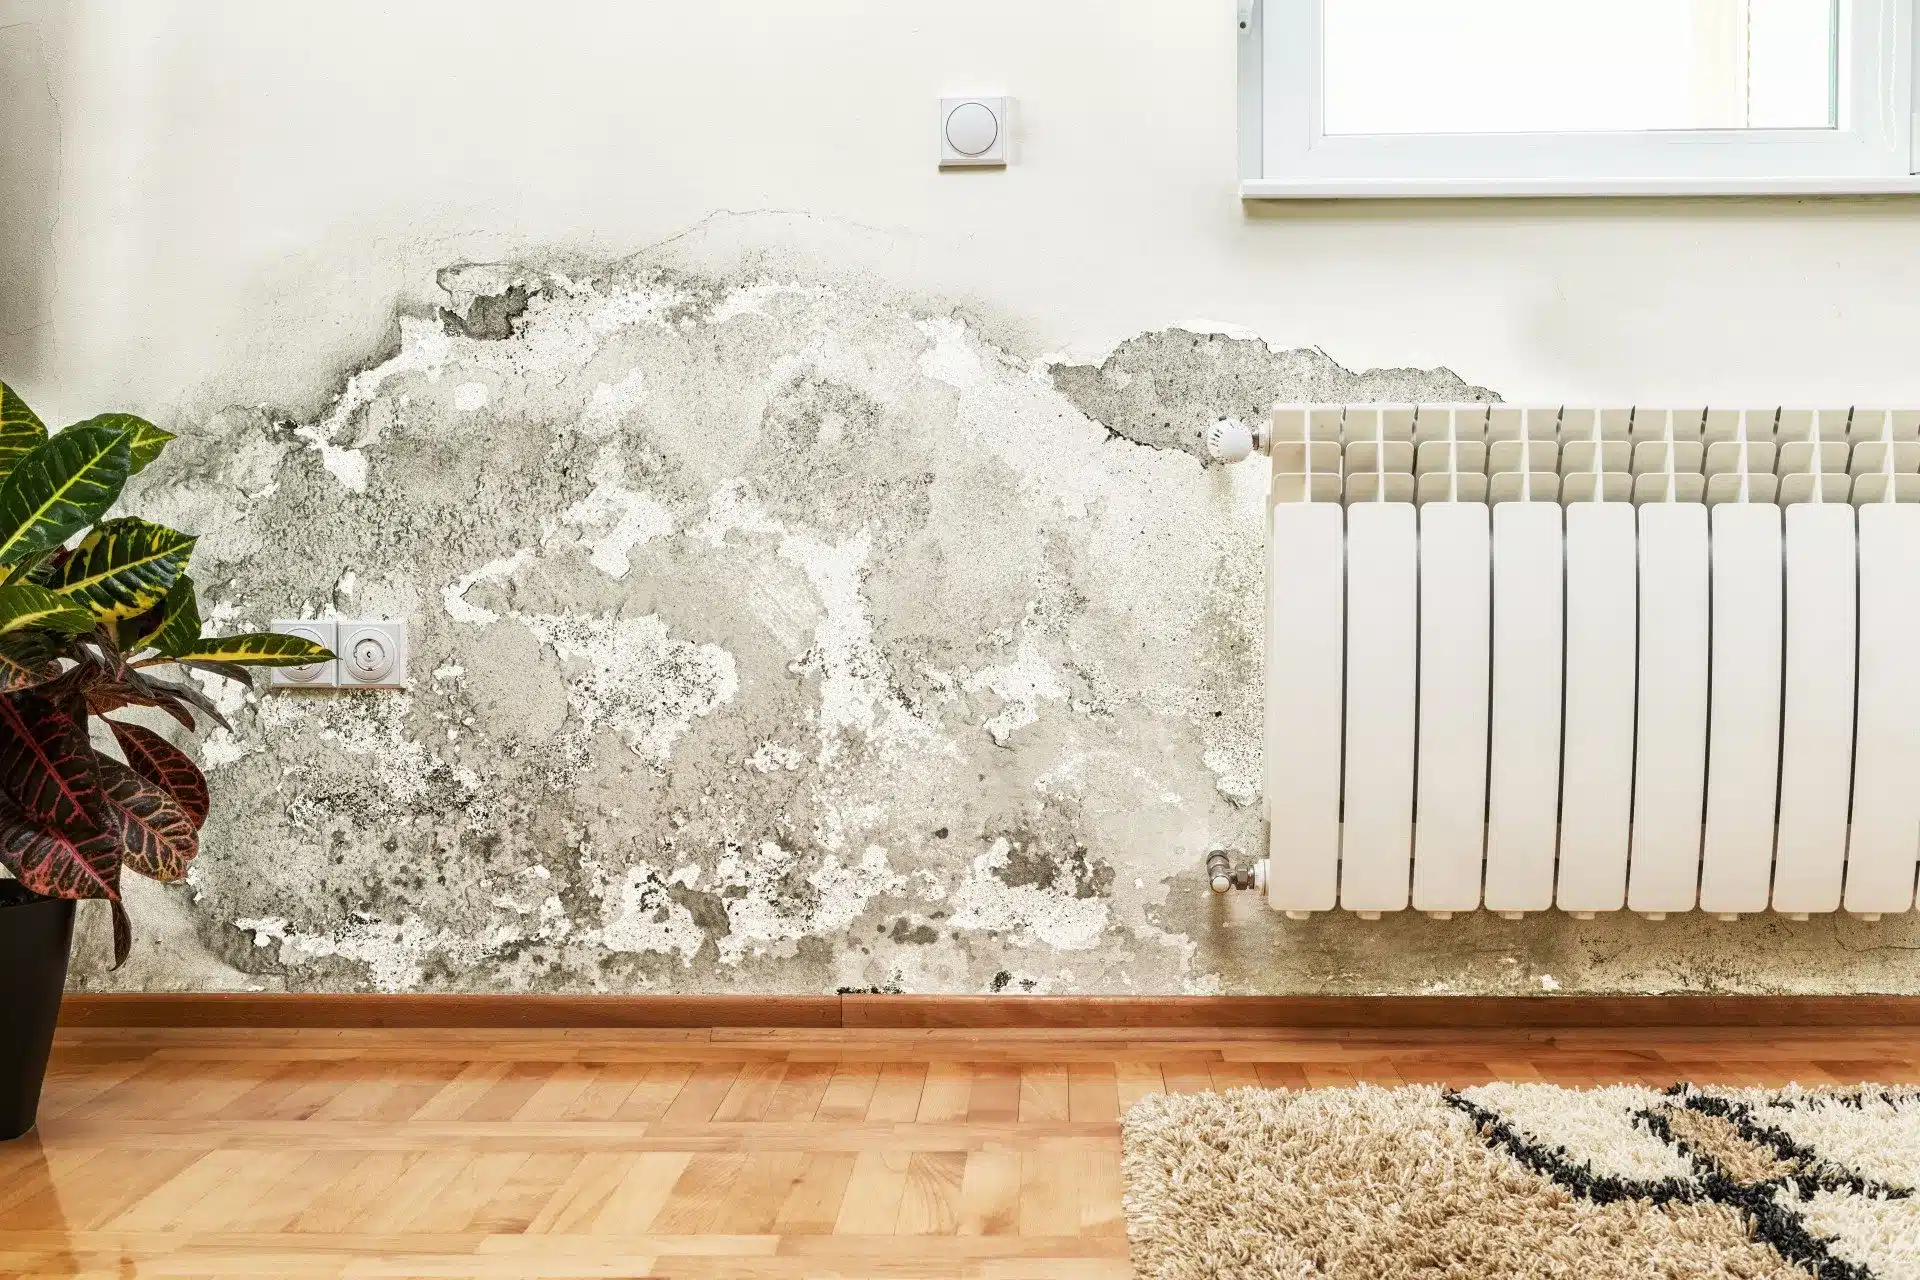 Wet Walls, Falling Value: How Water Damage Hurts Your Home